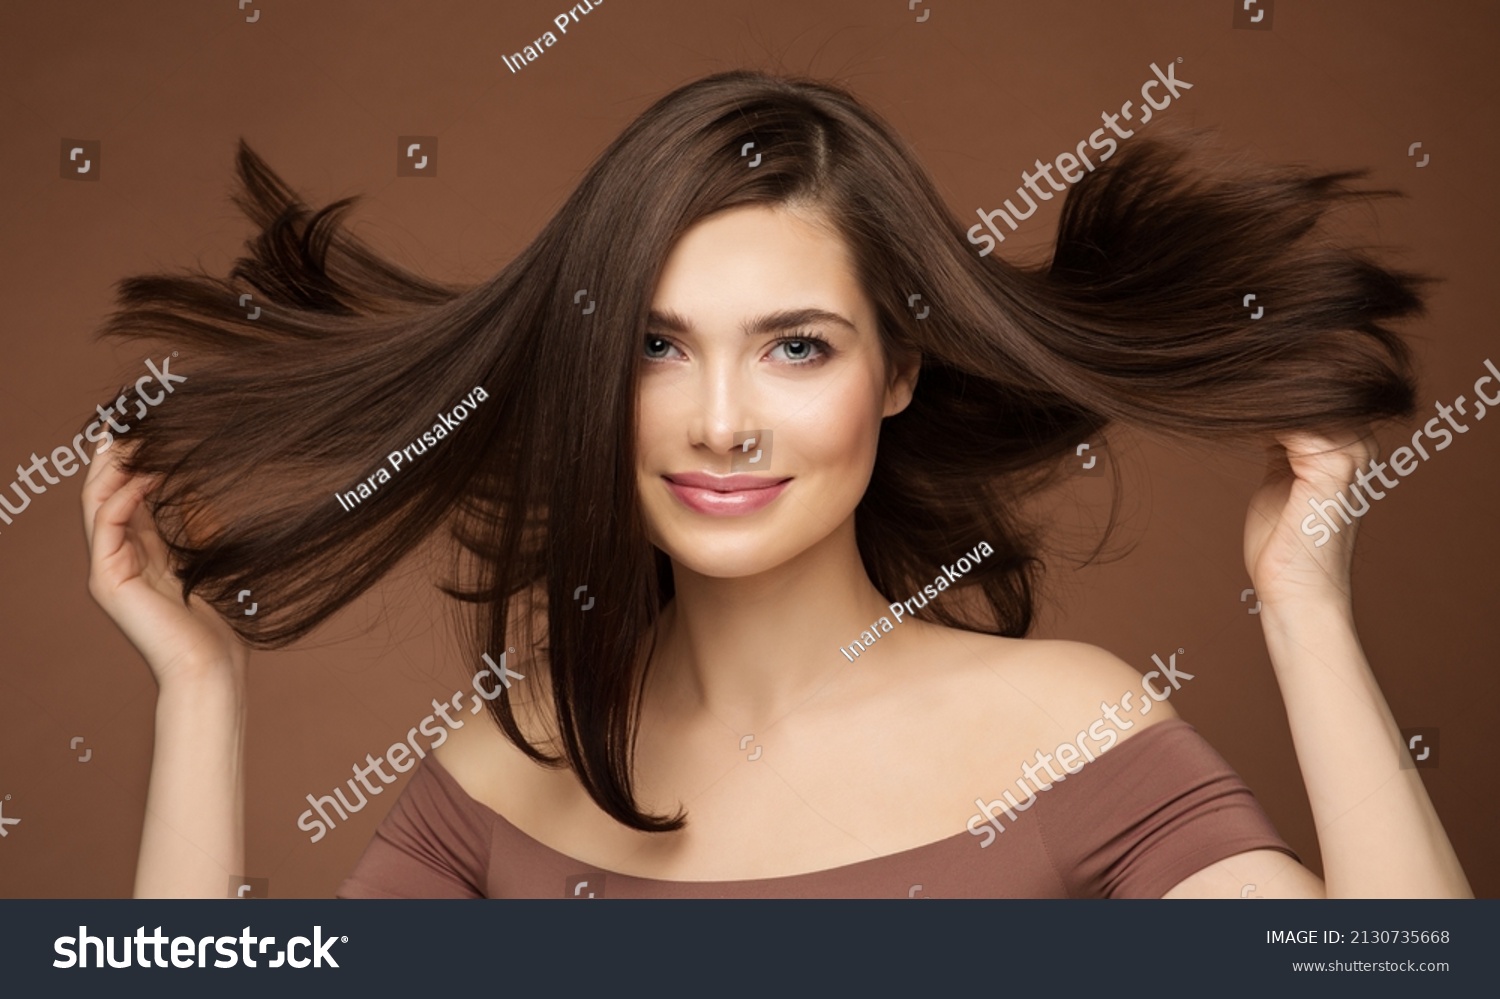 Hair Beauty Model. Brunette Woman with Straight Hairstyle flying on Wind over Dark Beige. Young Smiling Girl with Smooth Skin Make up #2130735668